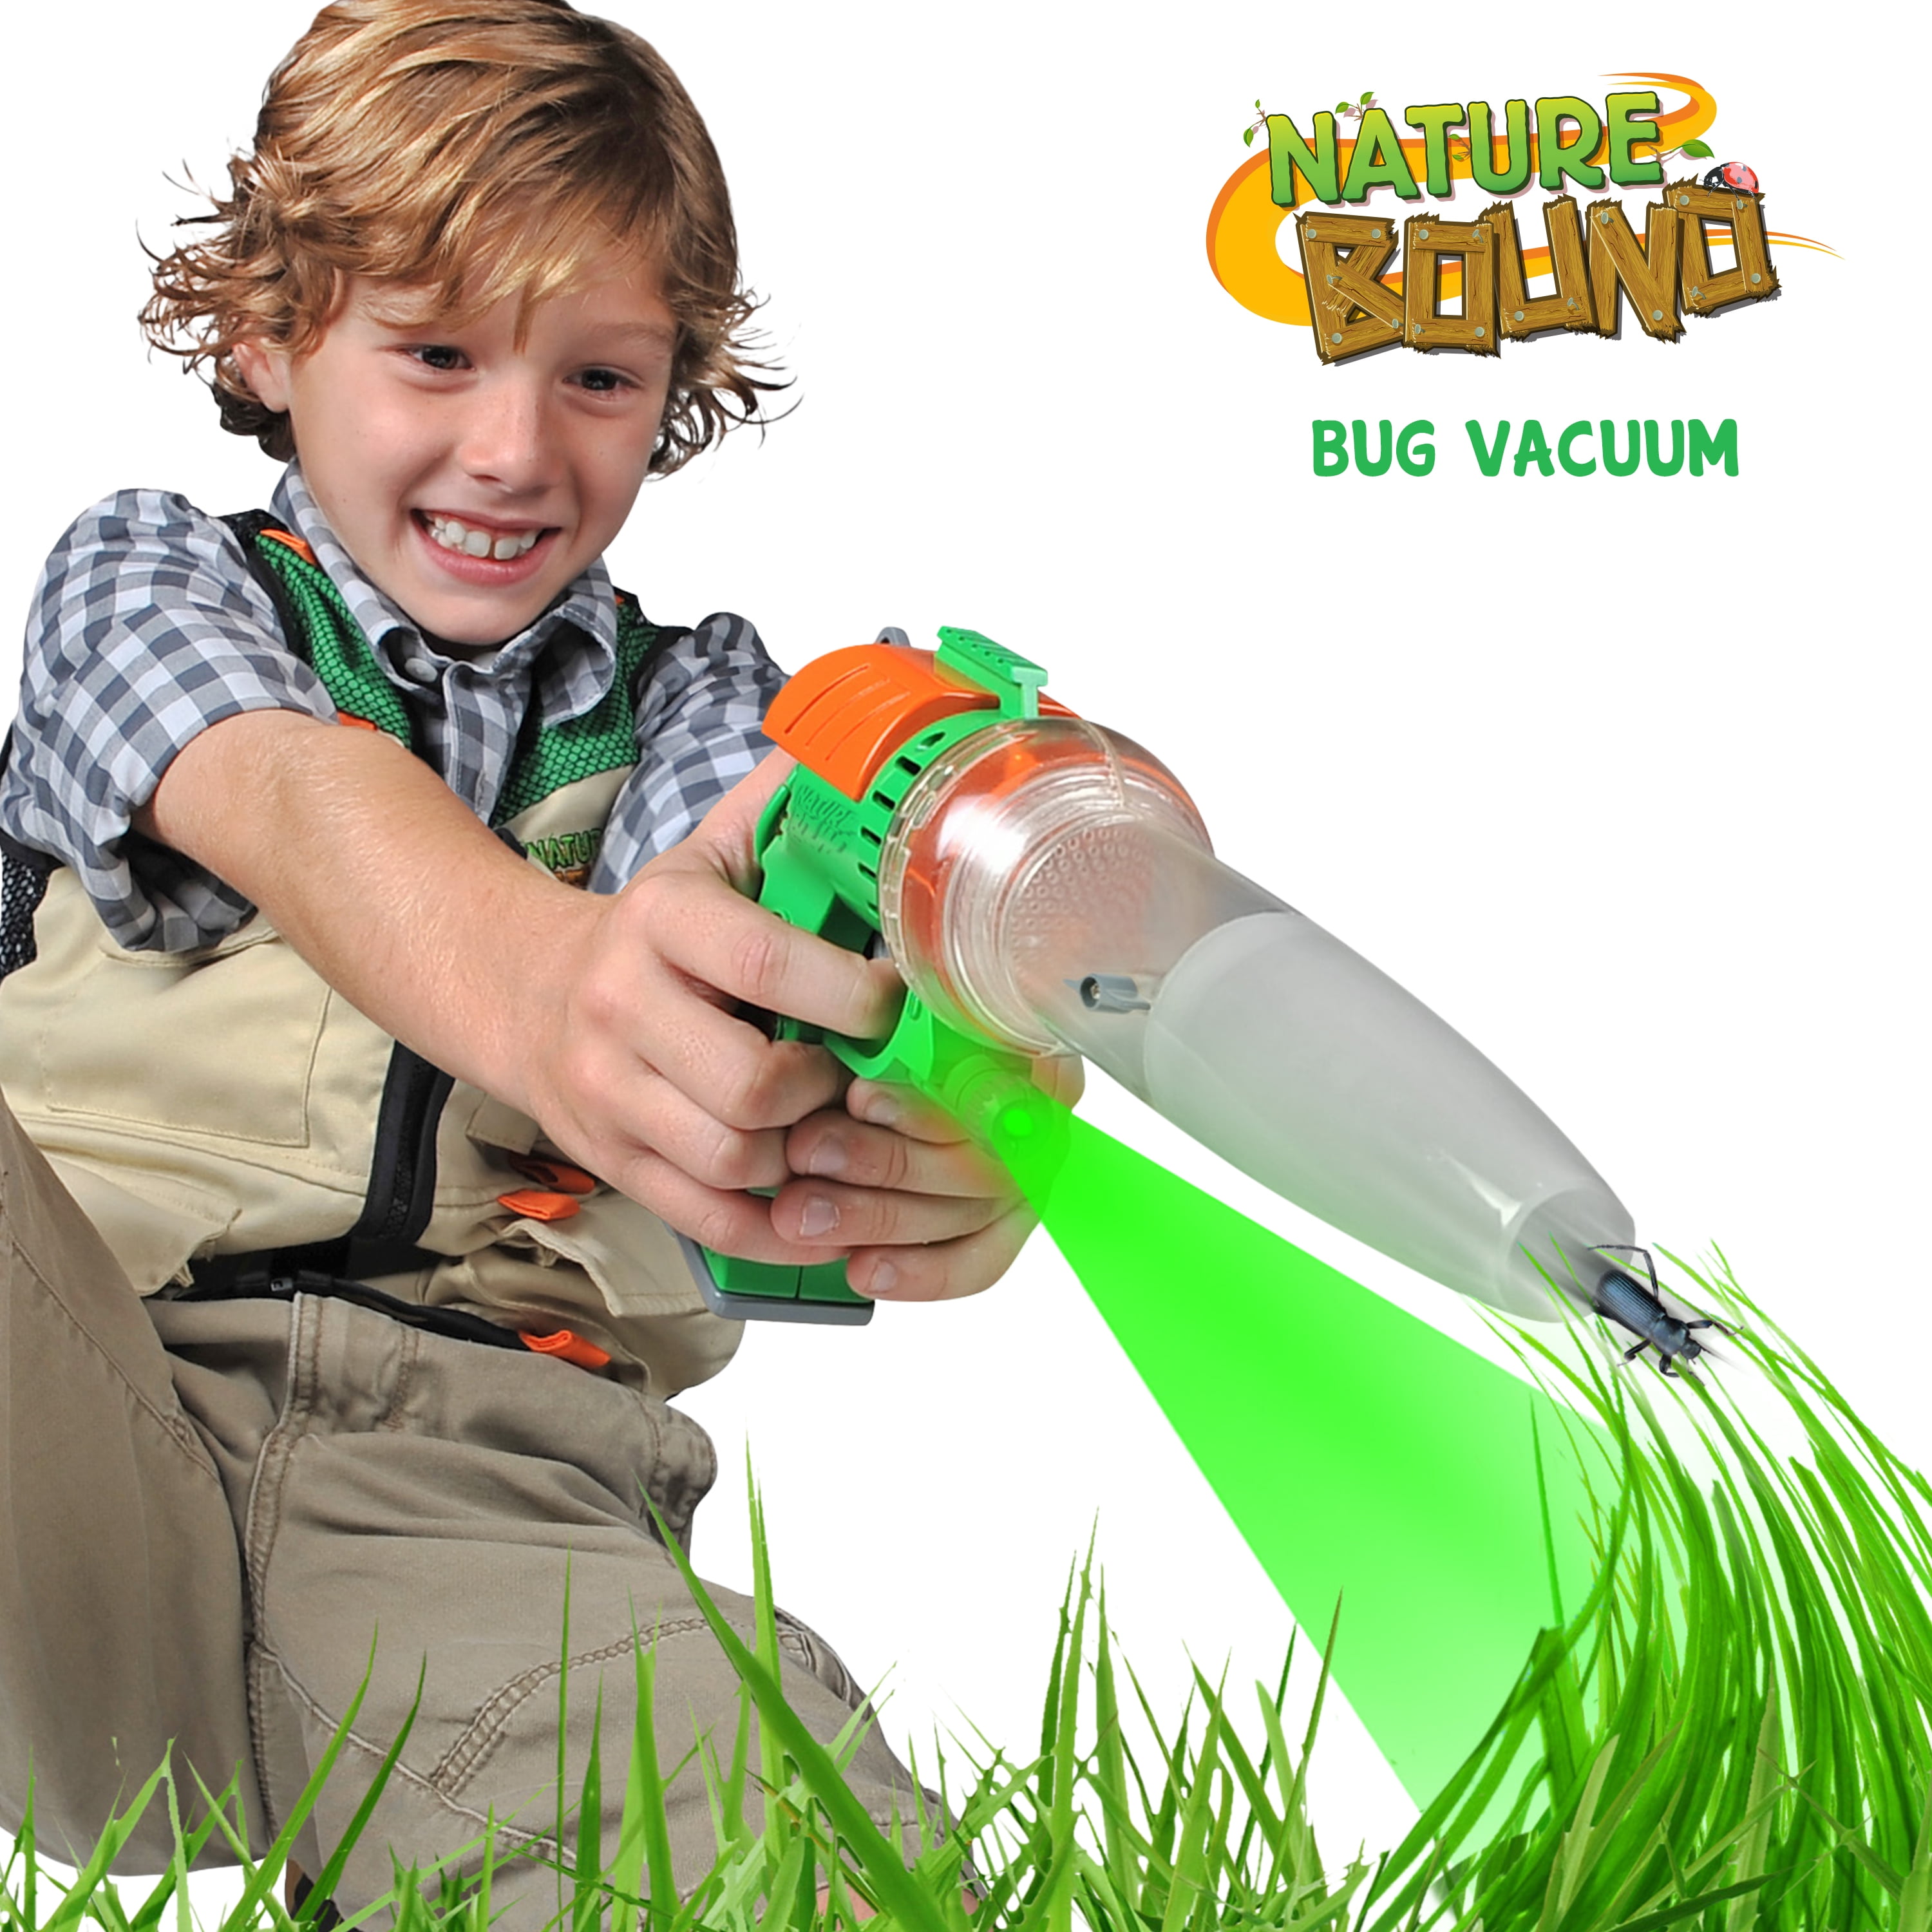 Nature Bound Bug Catcher Toy, Eco-Friendly Bug Vacuum for Kids